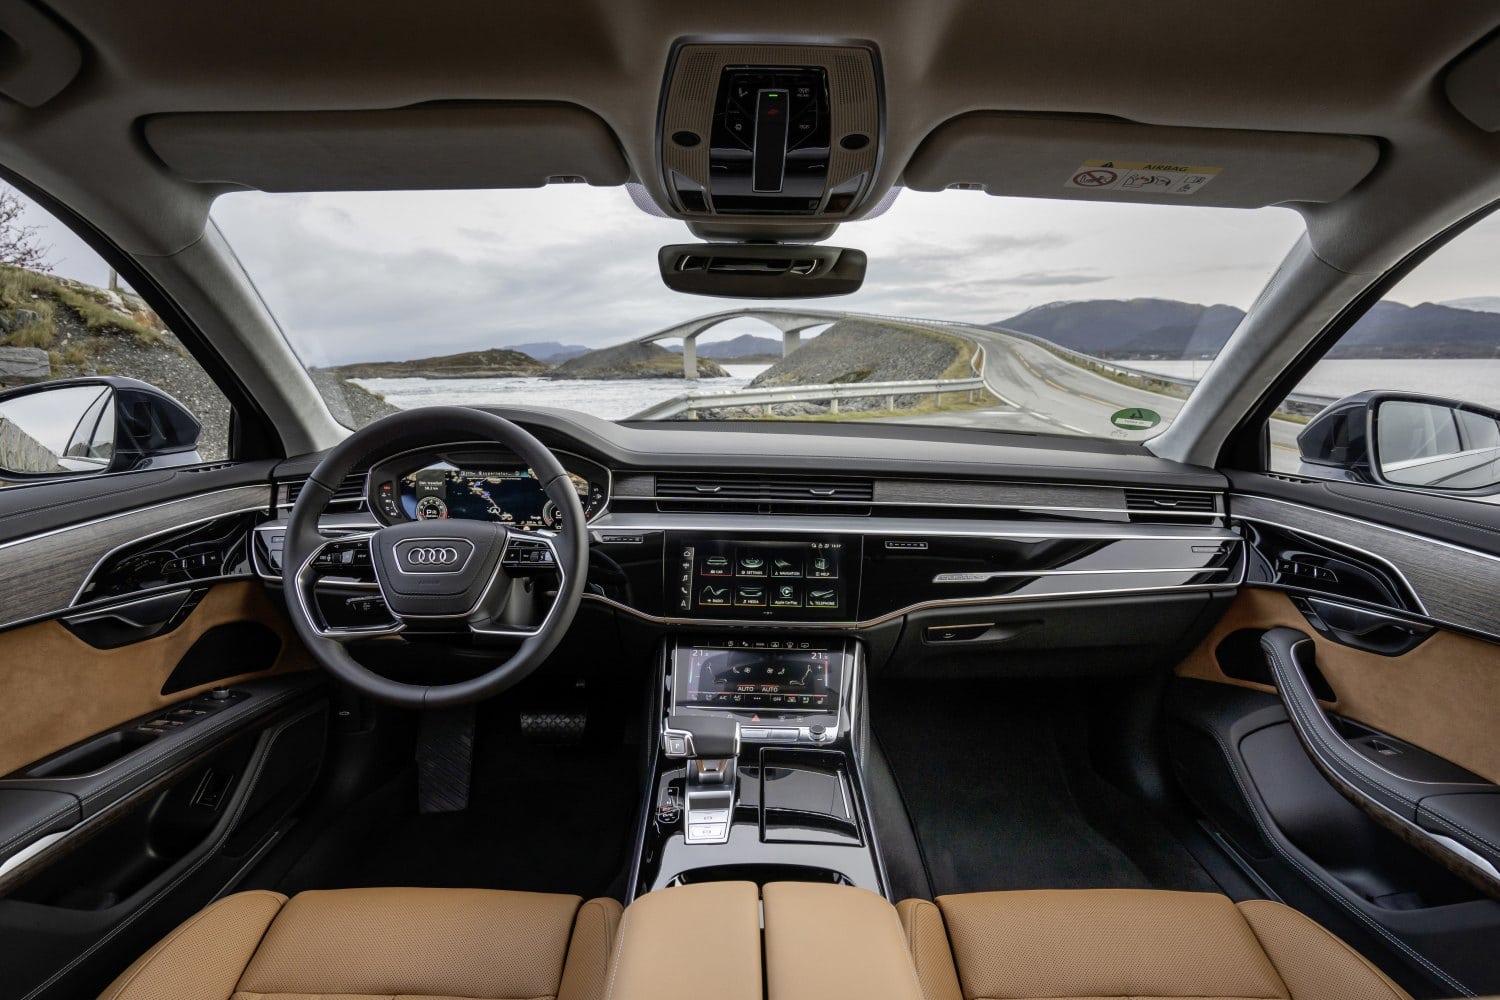 New Audi A8 60 TFSIe plug-in hybrid with 462 hp